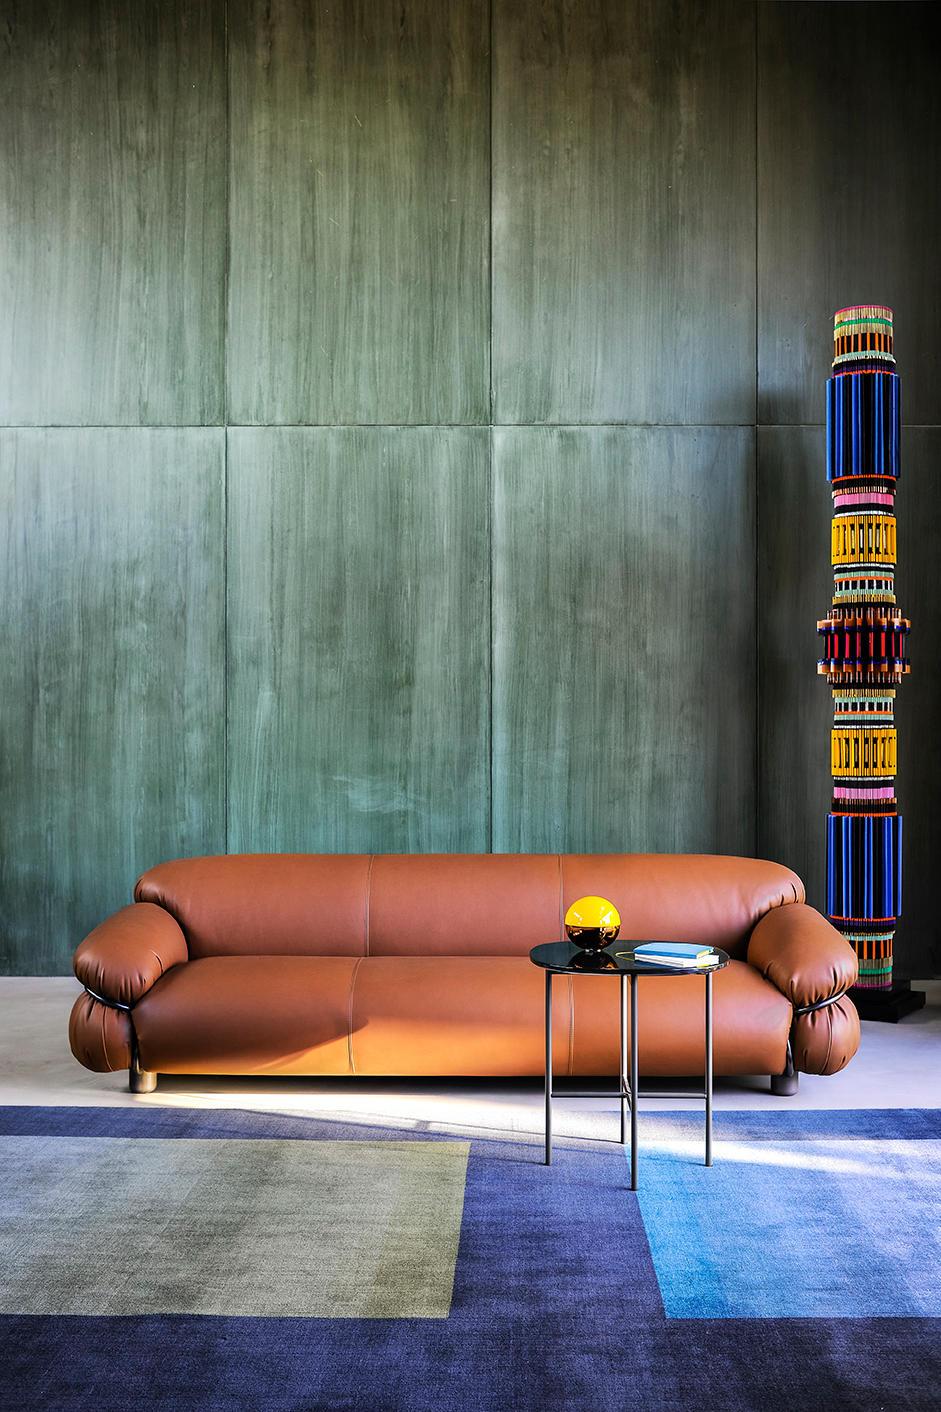 A reissue of a historic design by Gianfranco Frattini, Sesann is a collection of sofas and armchairs with soft, cosy forms that evoke feelings of warmth and sensuality, thanks to the tubular metal frame, which acts as an architectural structure,